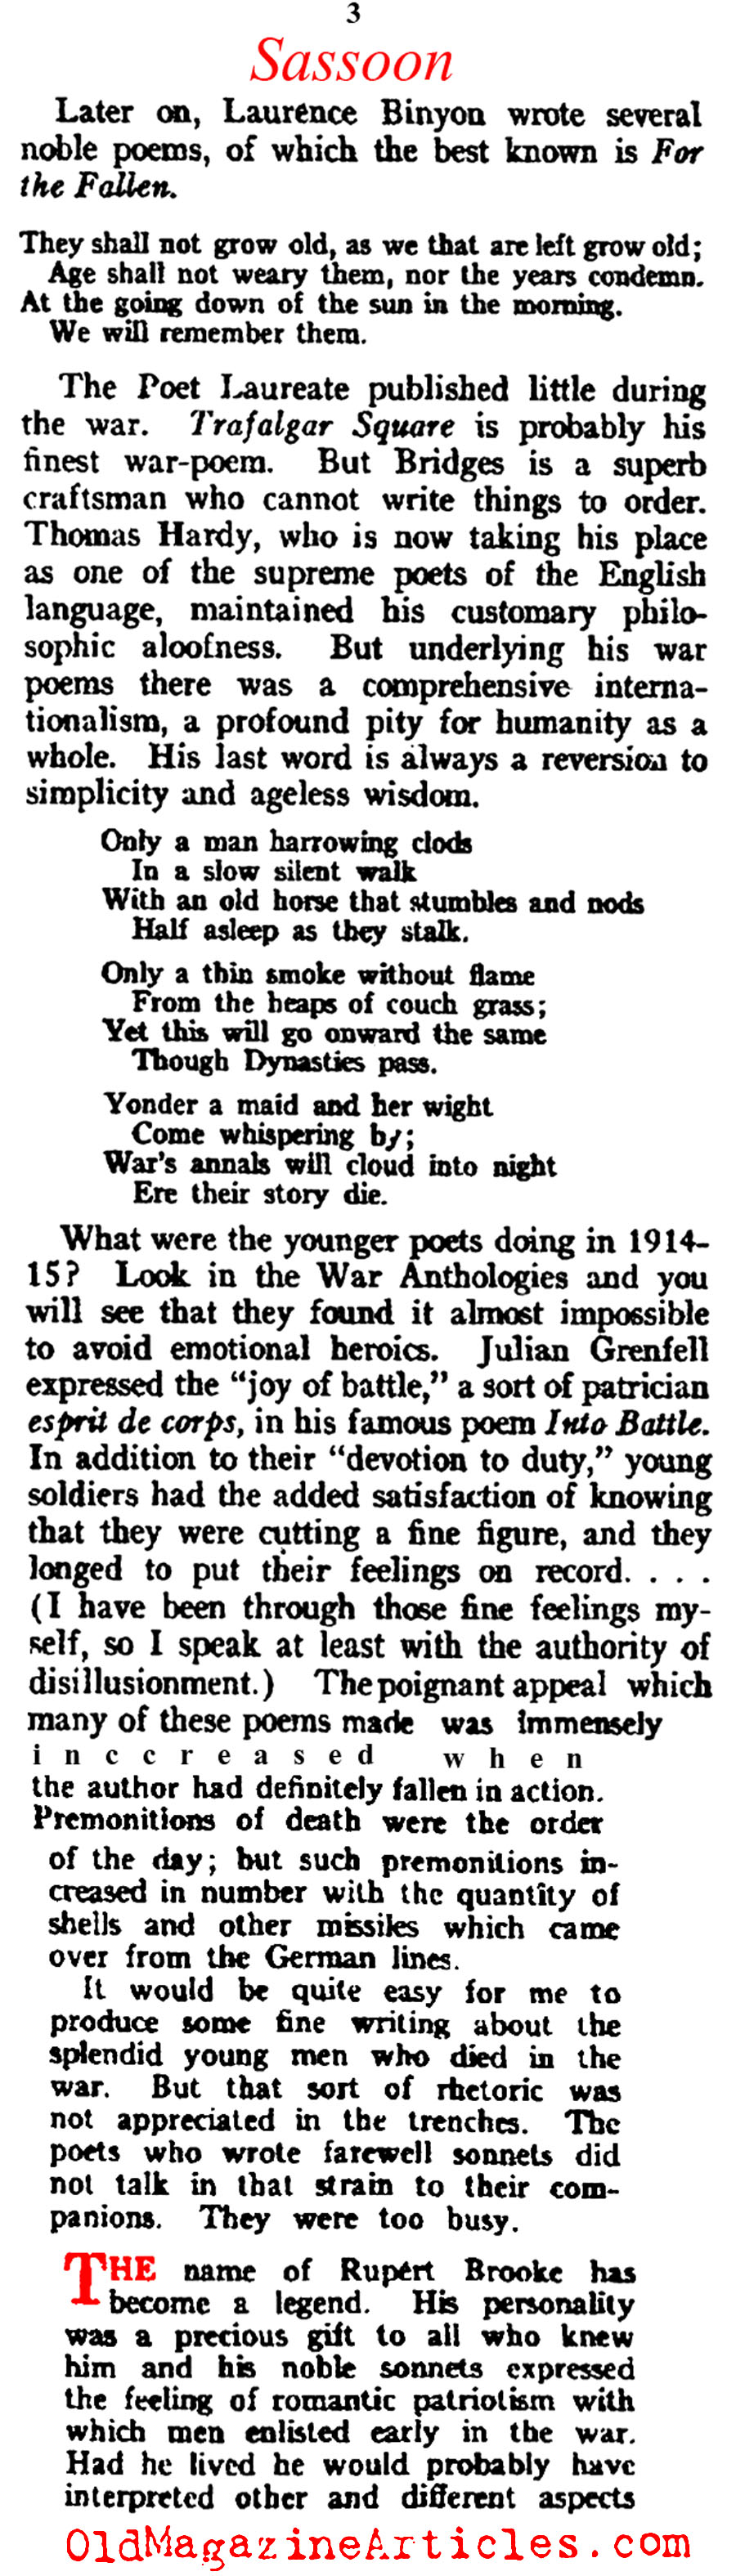 ''Some Aspects of War Poetry by Siegfried Sassoon (Vanity Fair Magazine, 1920)